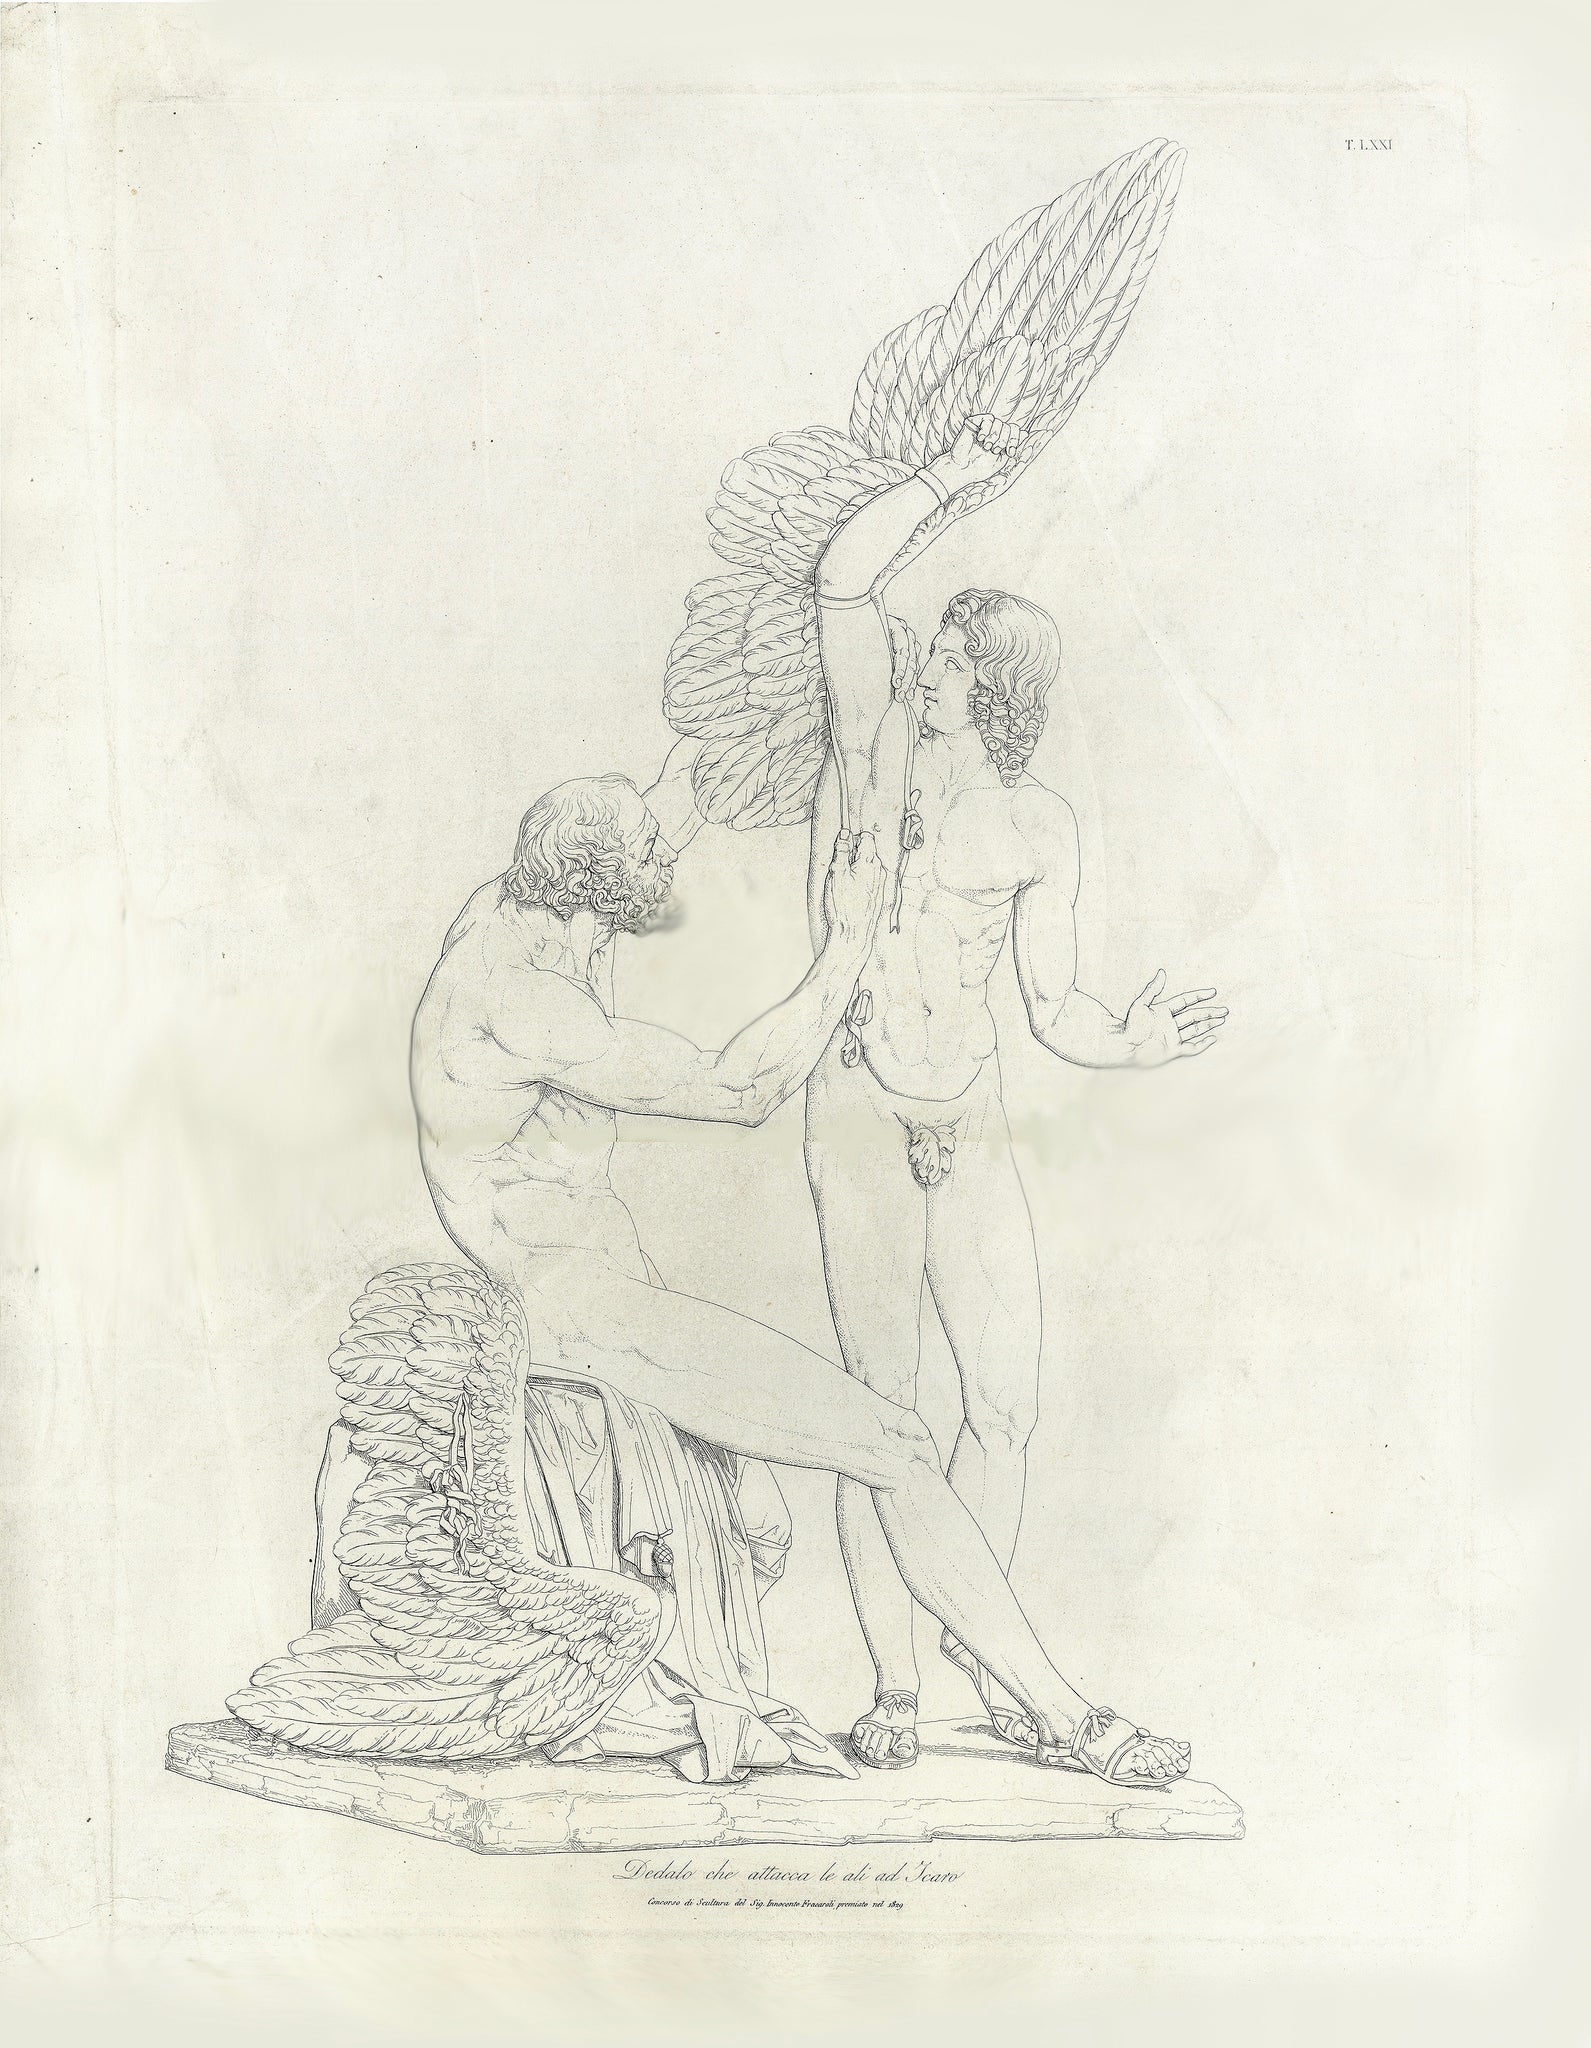 "Dedalo che attacca le ali ad Icaro"  Daidalos fastening the wings to Icarus  Copper line etching after a sculpture by Innocenzo Fraccaroli (Kastelruth 1805 - 1882 Milano)  "Daedalus und Ikarus"(Daedalo e Icaro) won the first price at the Brera art exhibition 1829.